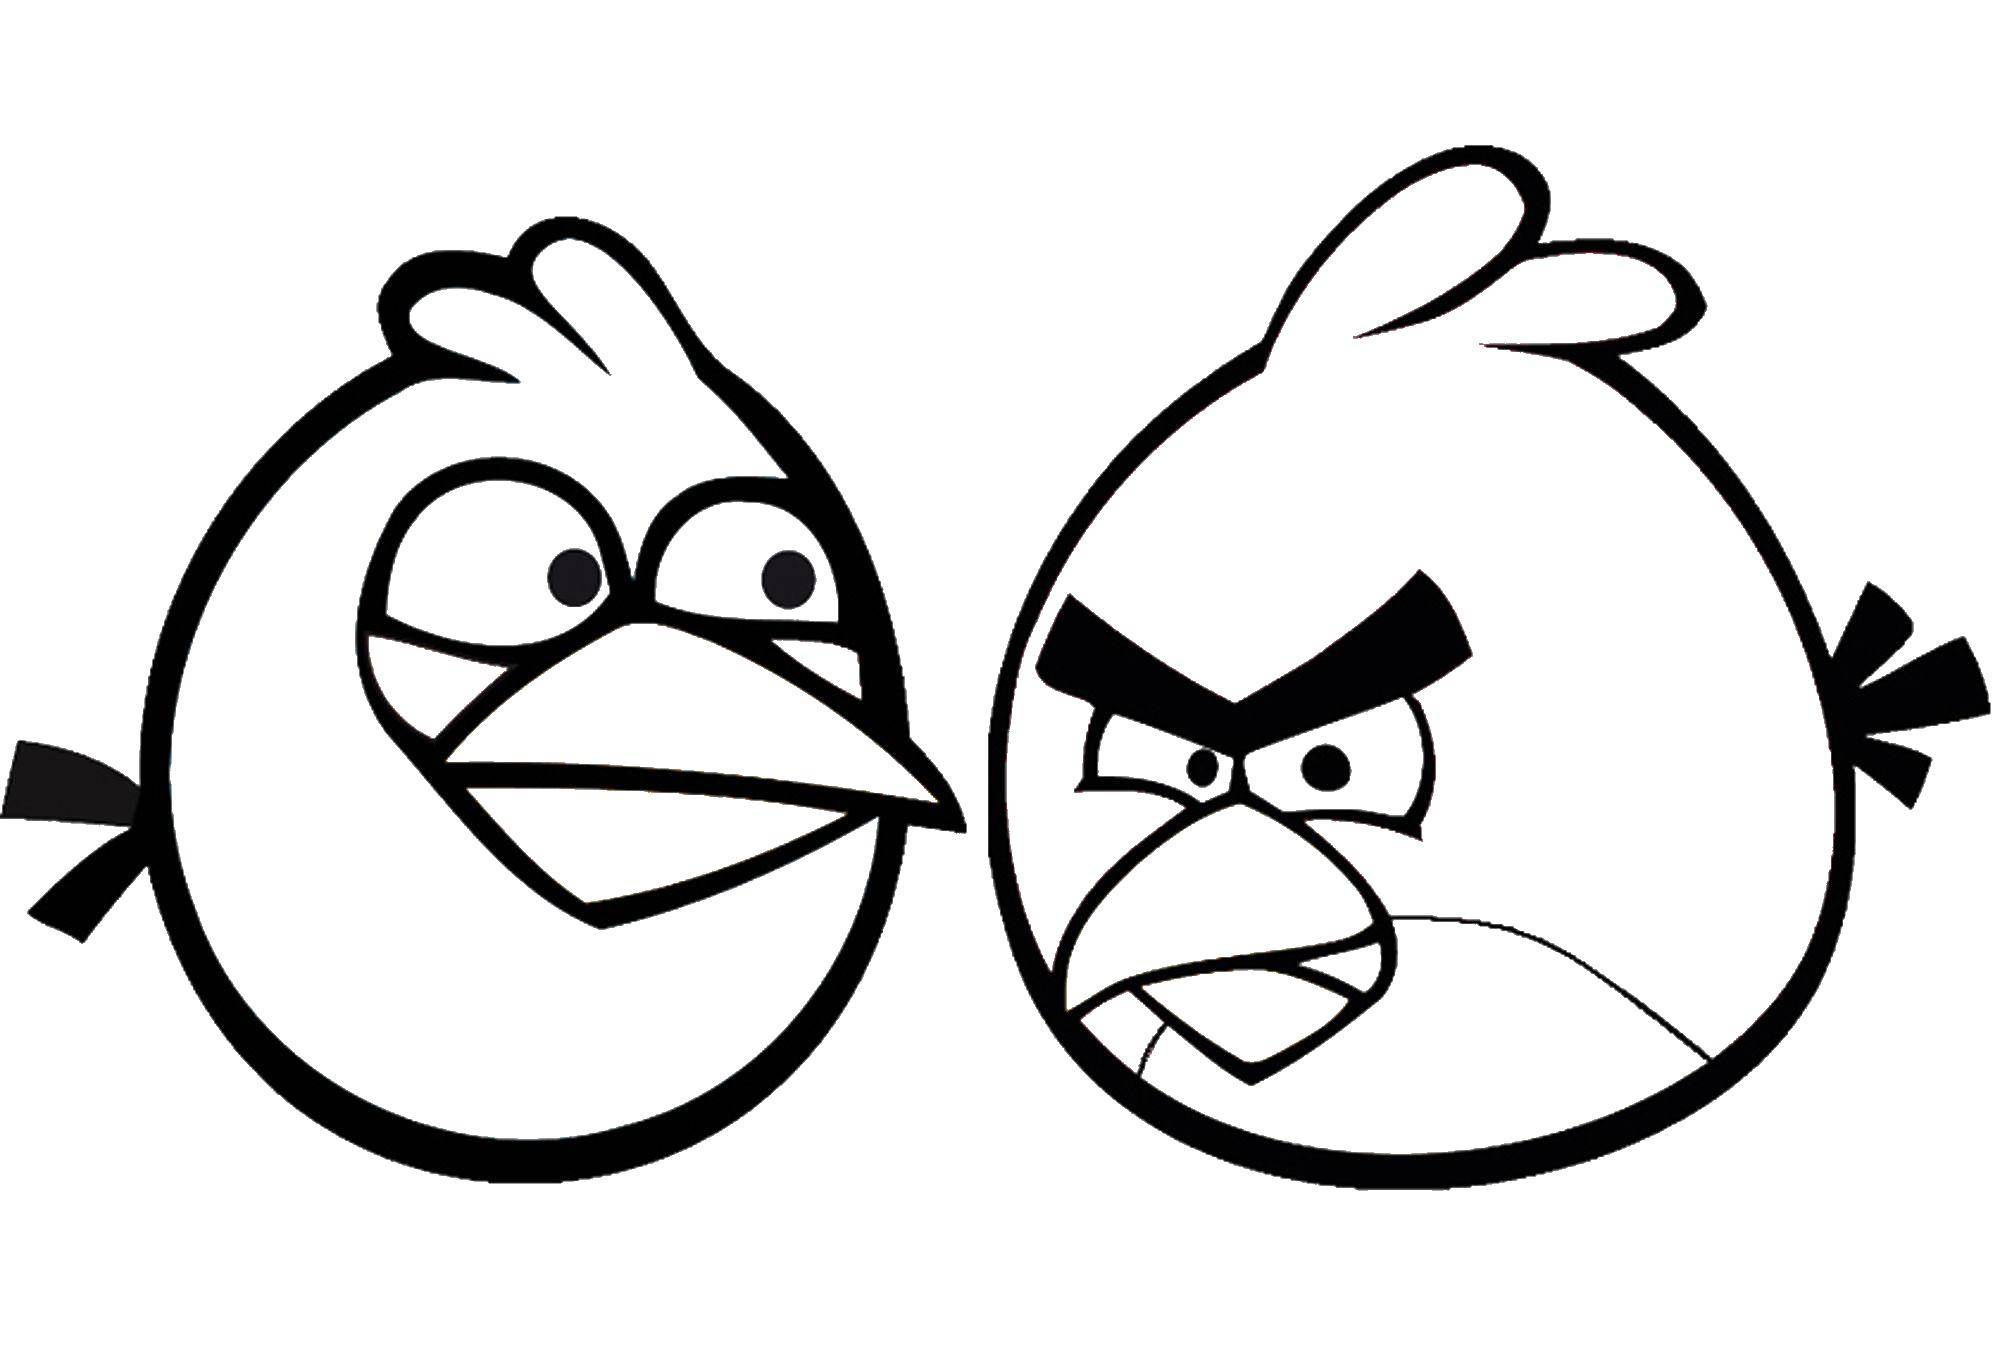 Coloring Two birds. Category angry birds. Tags:  angry birds, bird.